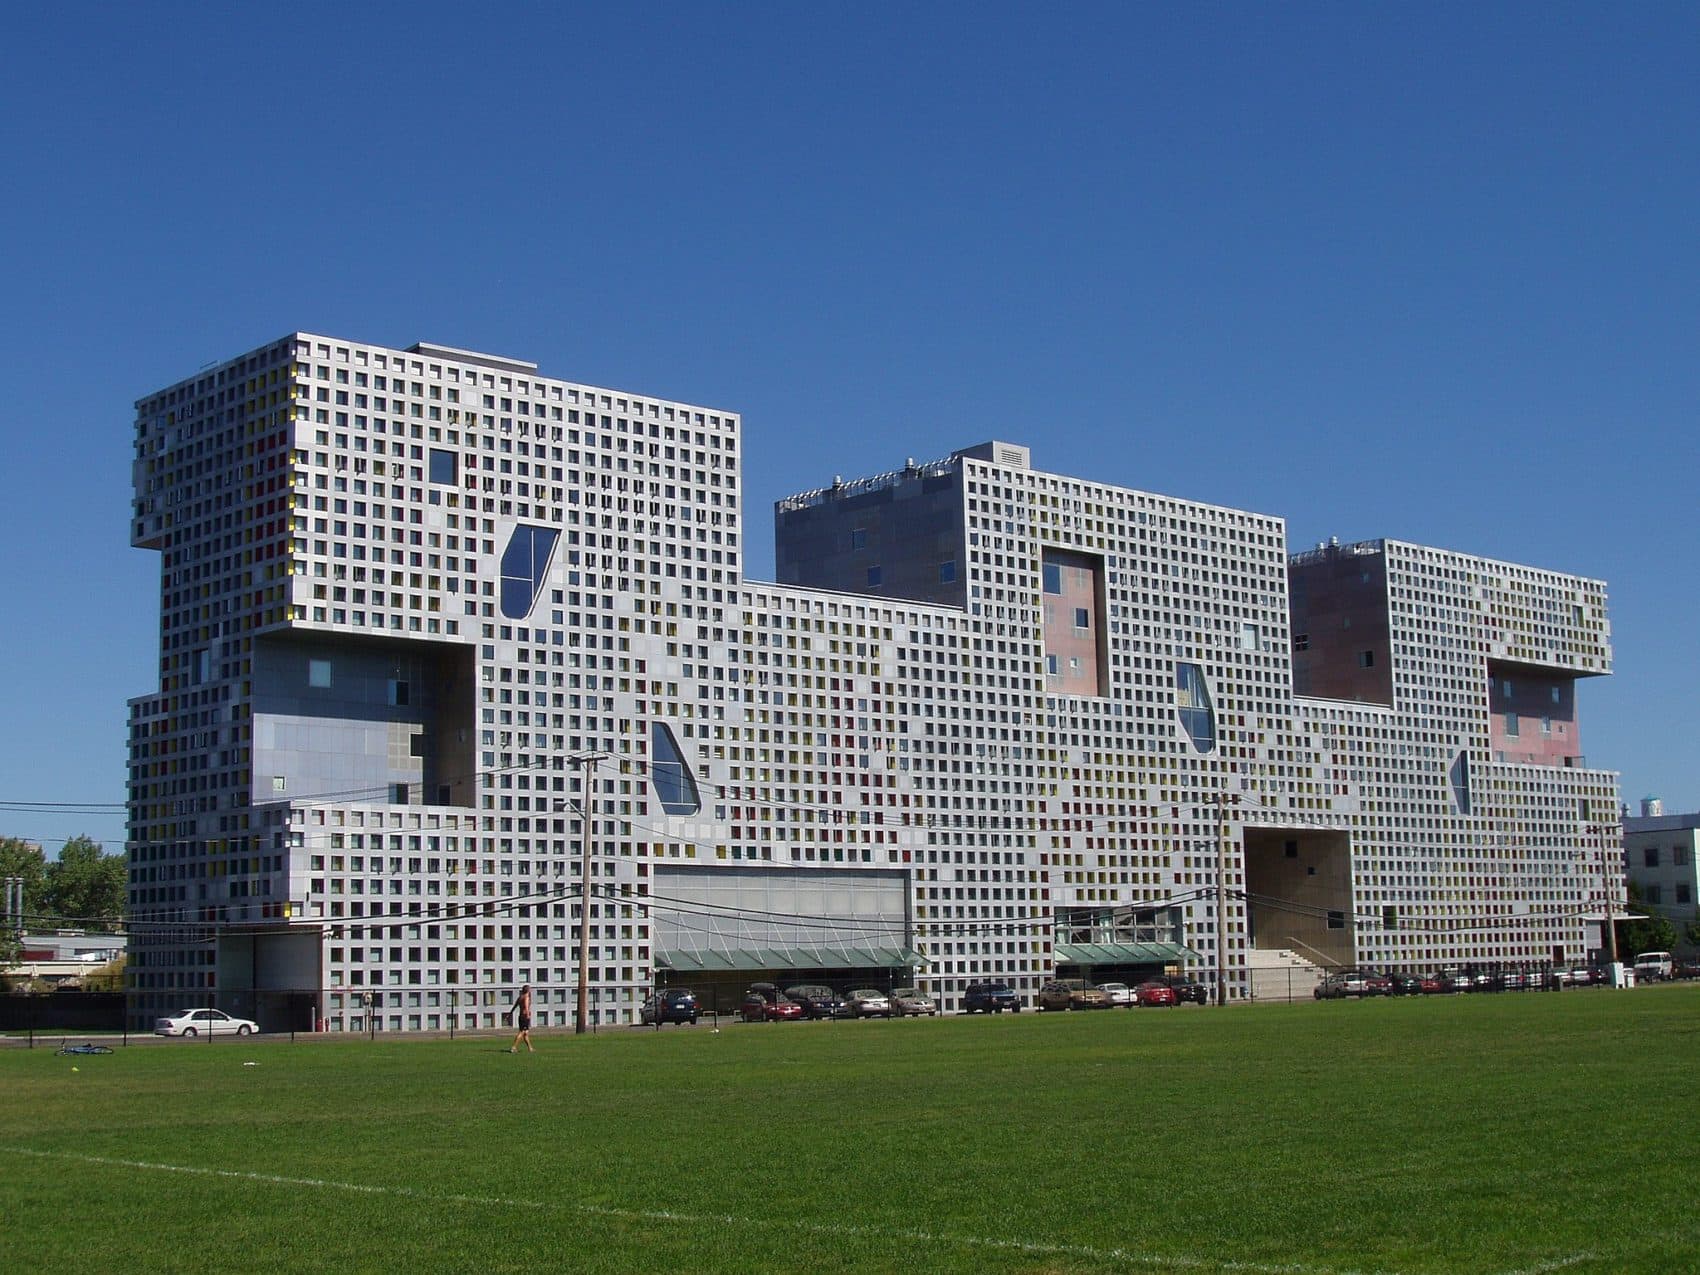 MIT's Simmons Hall in Cambridge. (Courtesy Daderot/Wikimedia Commons)